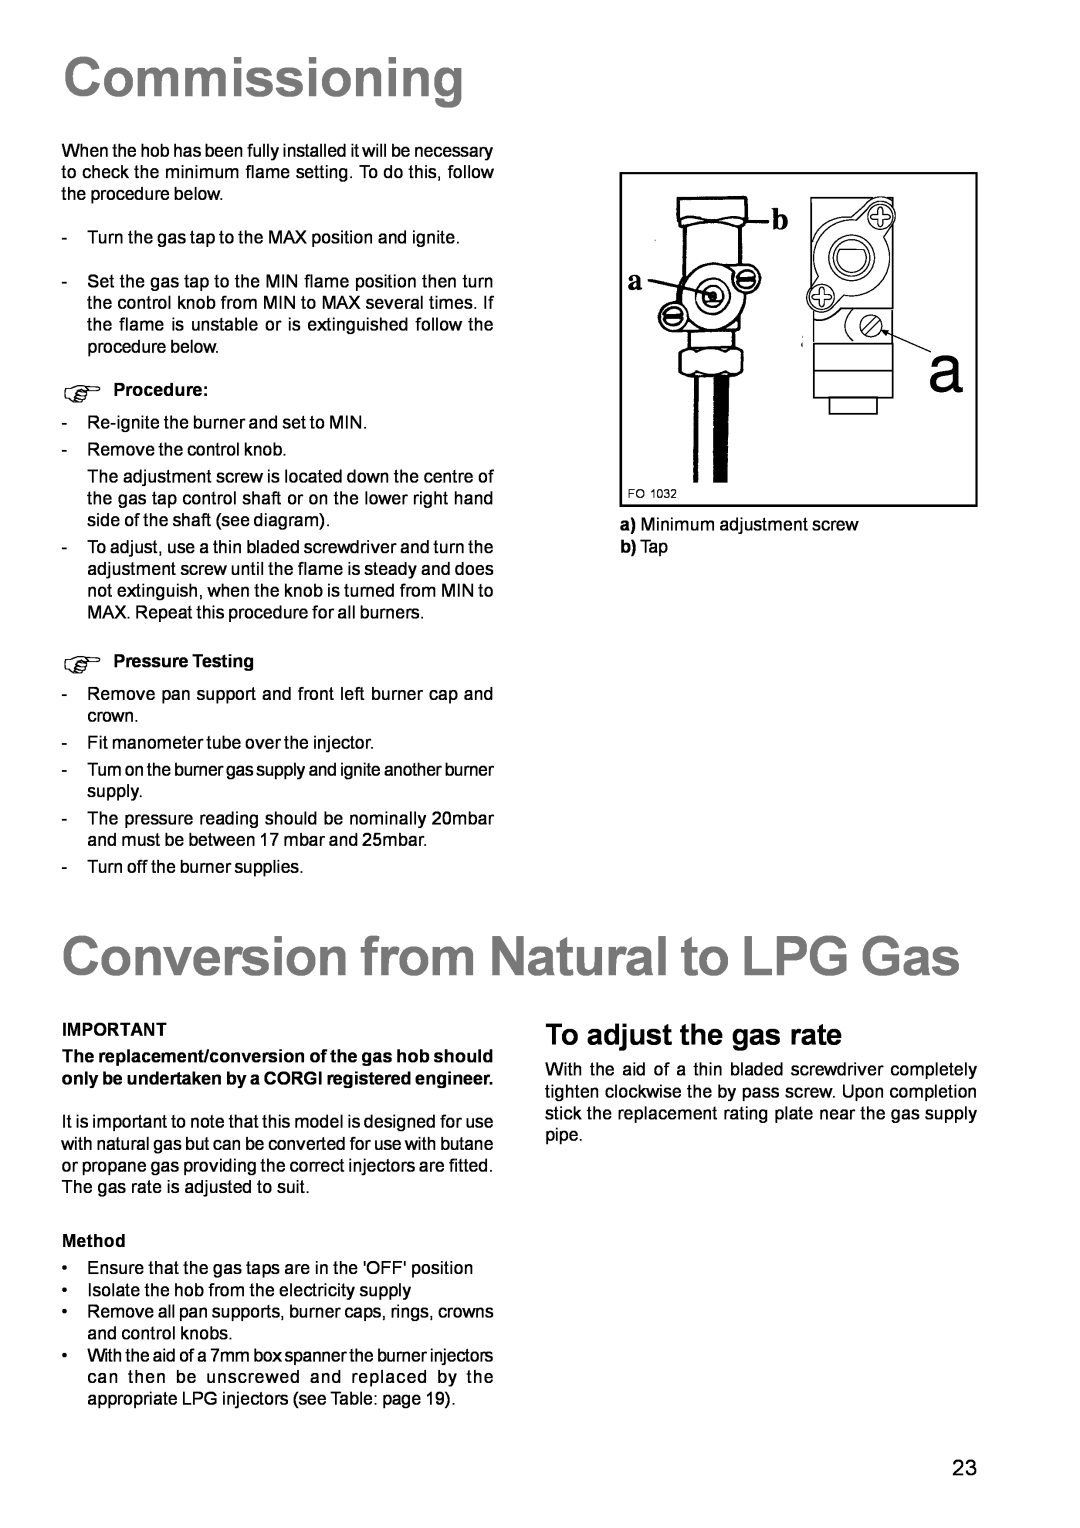 Zanussi ZCM 631 manual Commissioning, Conversion from Natural to LPG Gas, To adjust the gas rate 